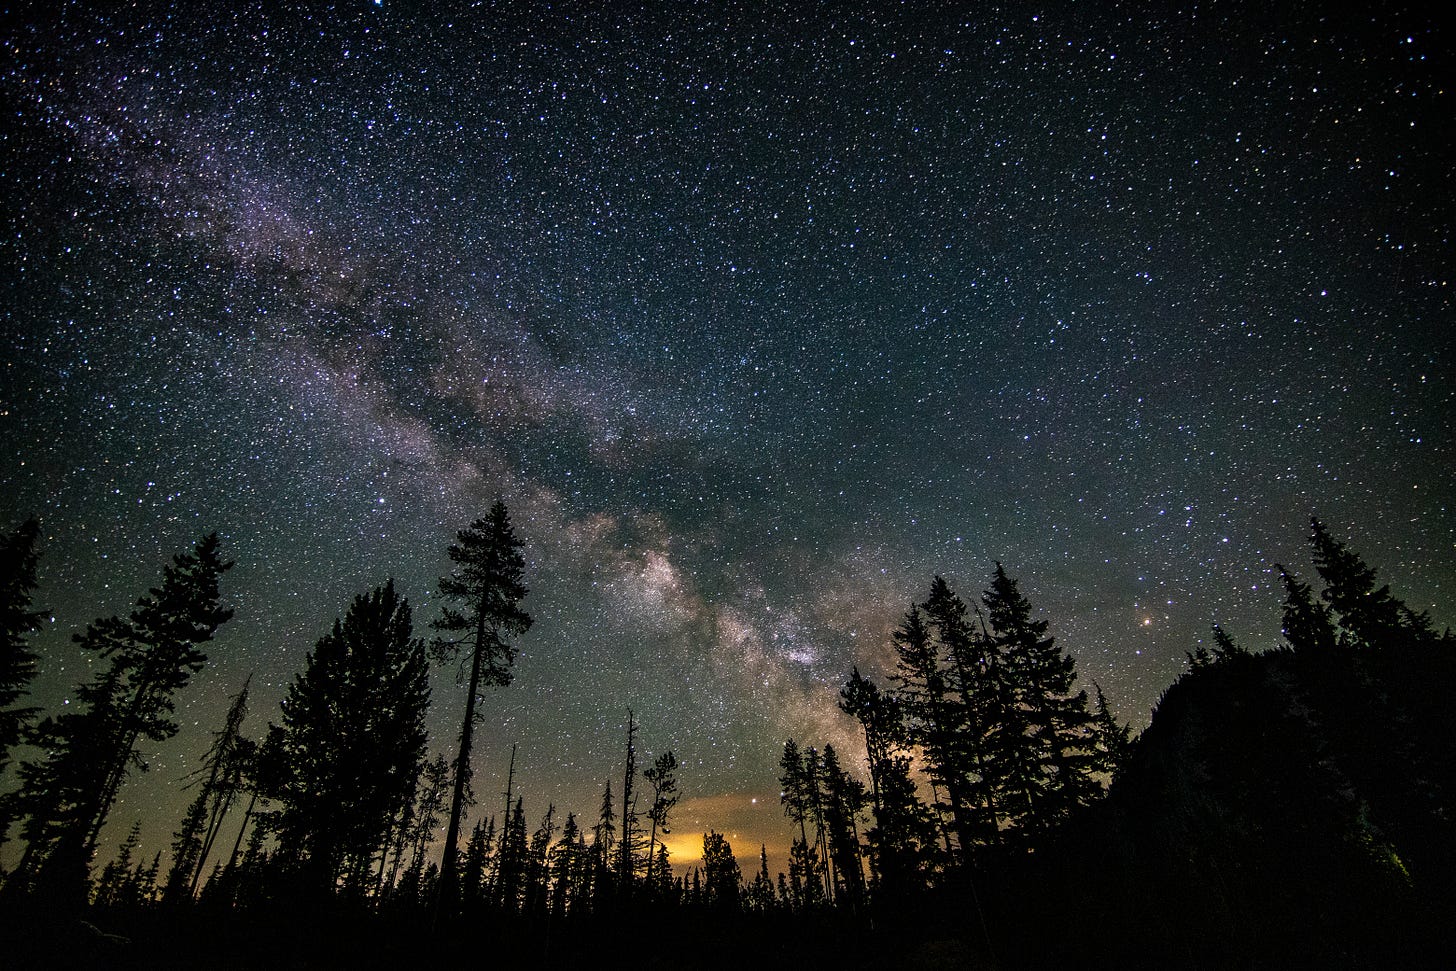 Milky Way sky with a forested foreground